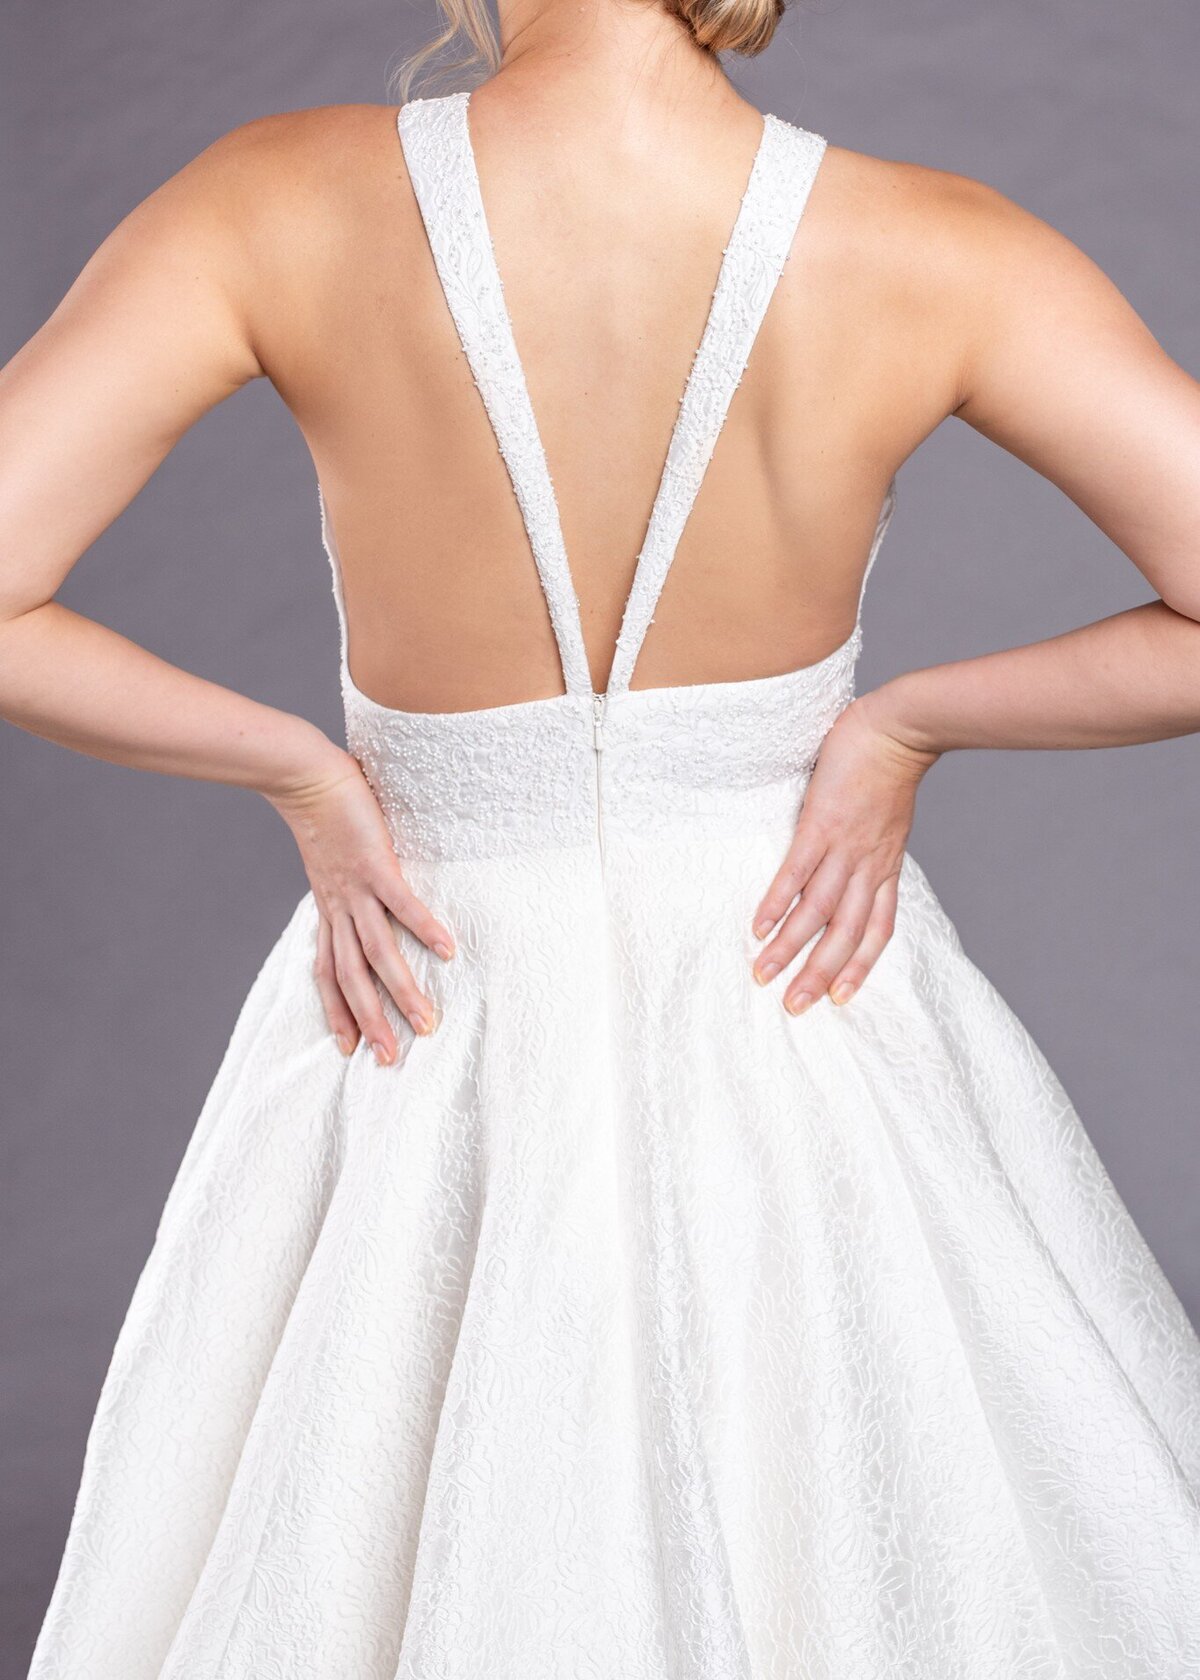 A close-up of the back shows how the ballgown wedding dress's straps come over the shoulders and meet at the zipper to form a V.